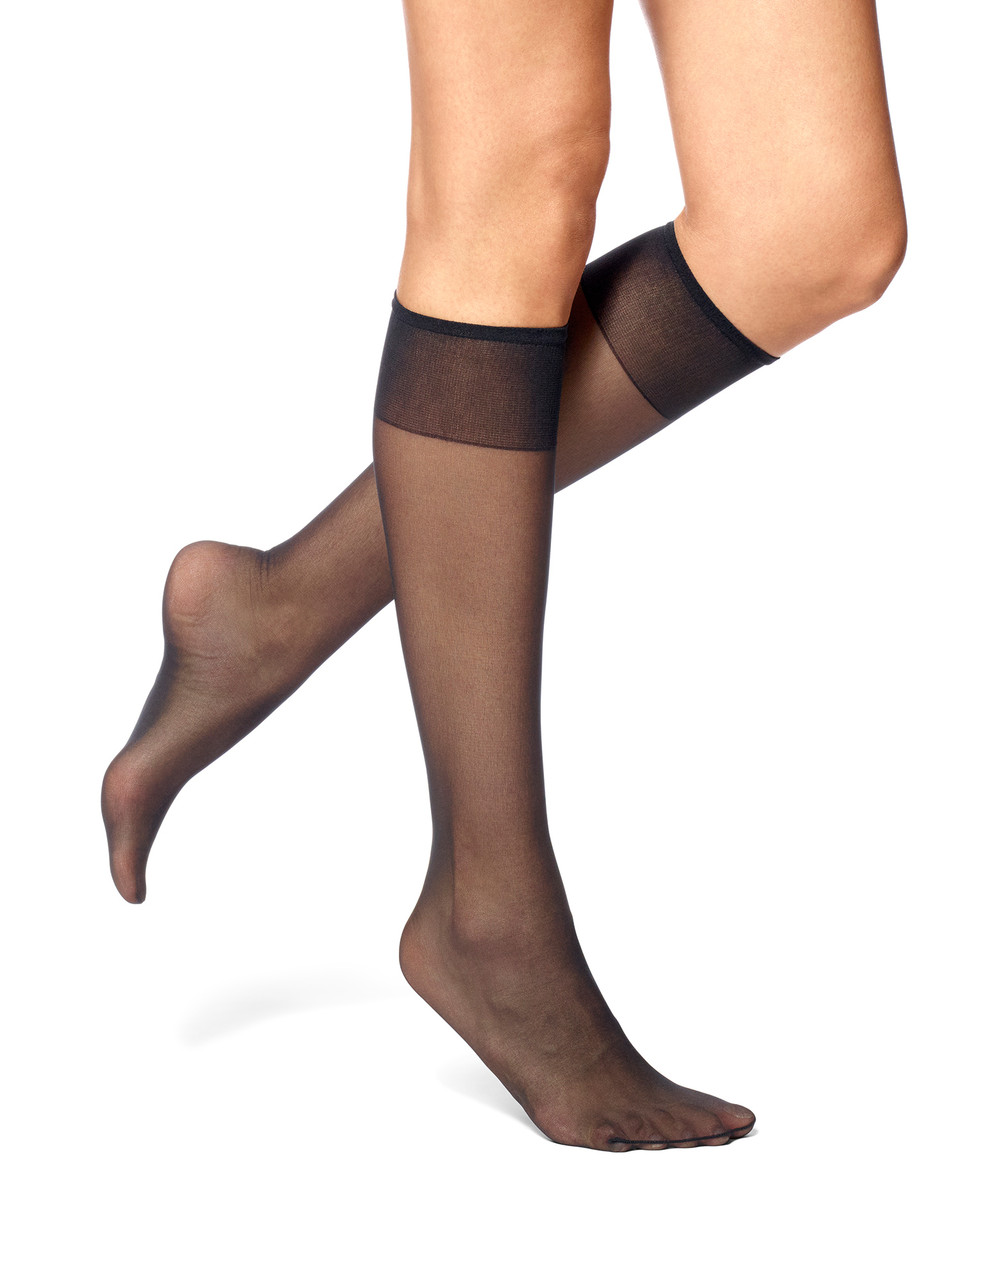 Comfy Cuff Cozy Hose Plush Lined Knee Highs